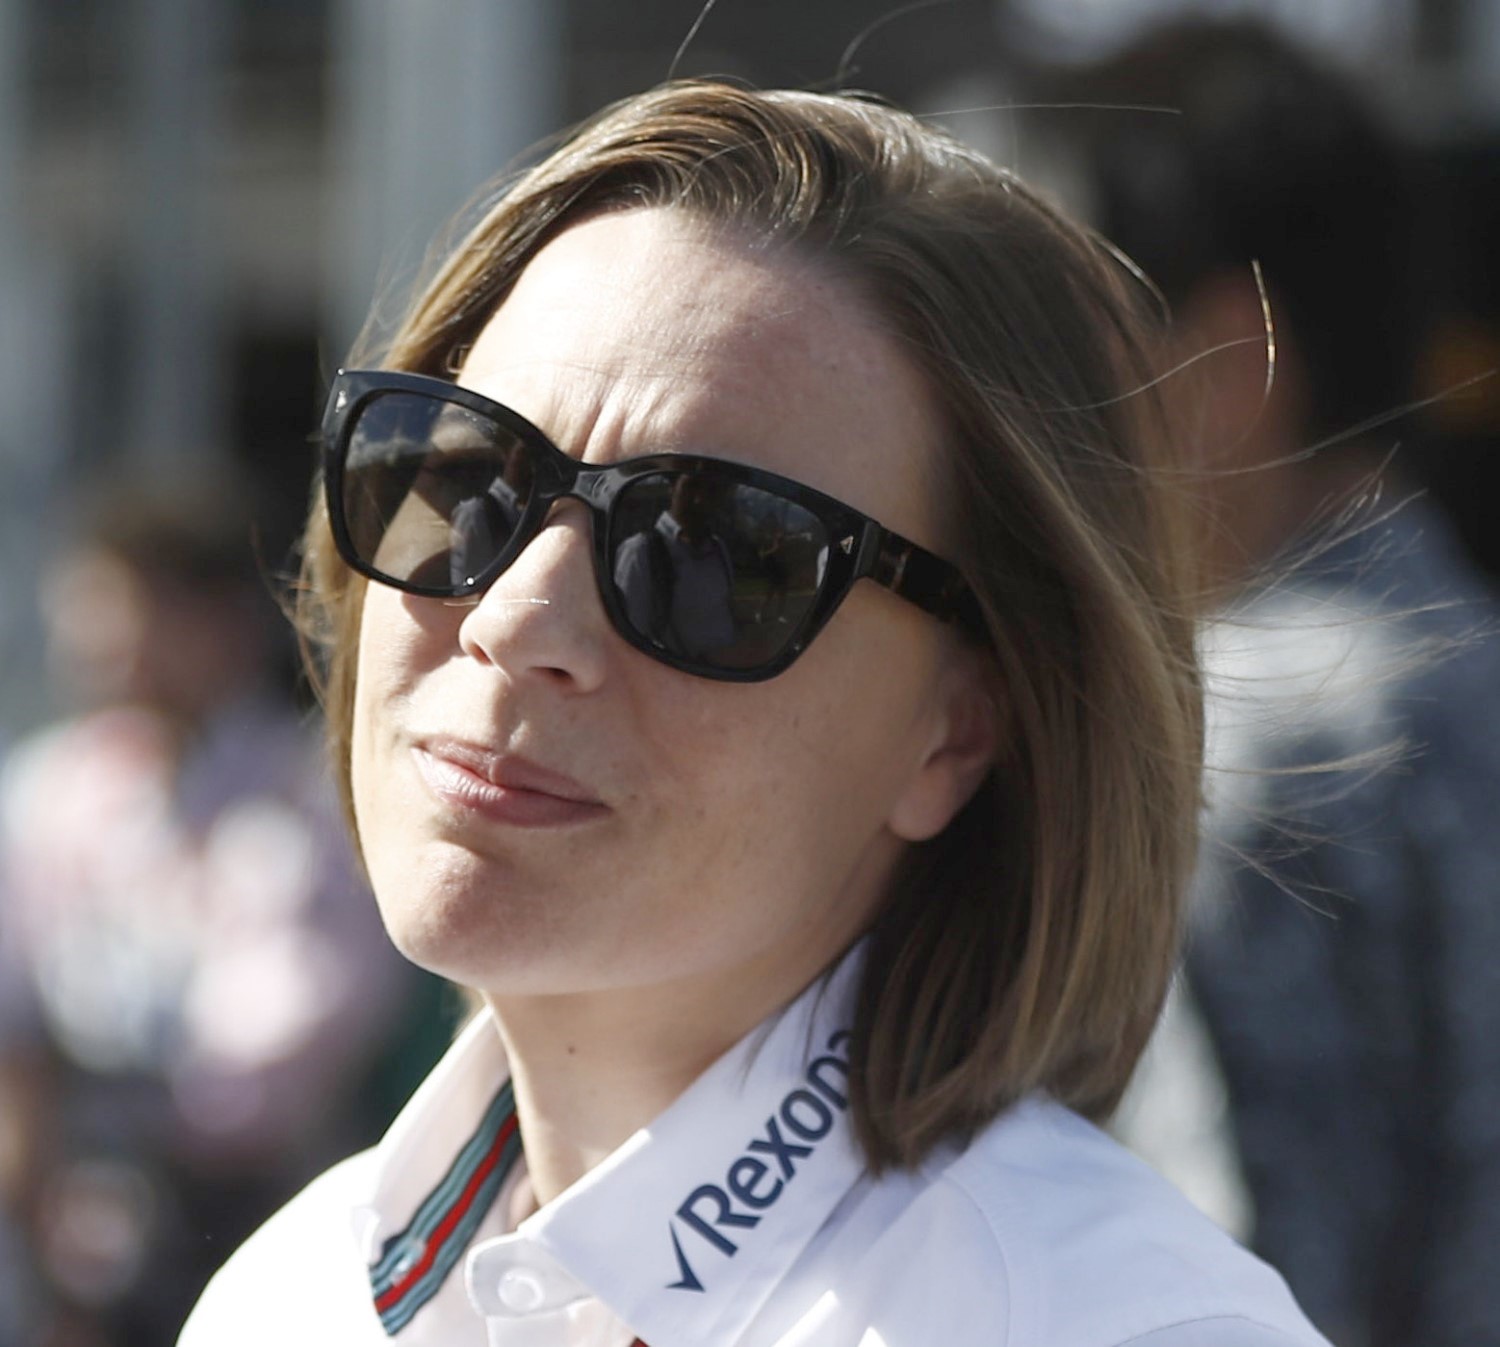 Claire Williams hired Paddy Lowe and it was all downhill from there